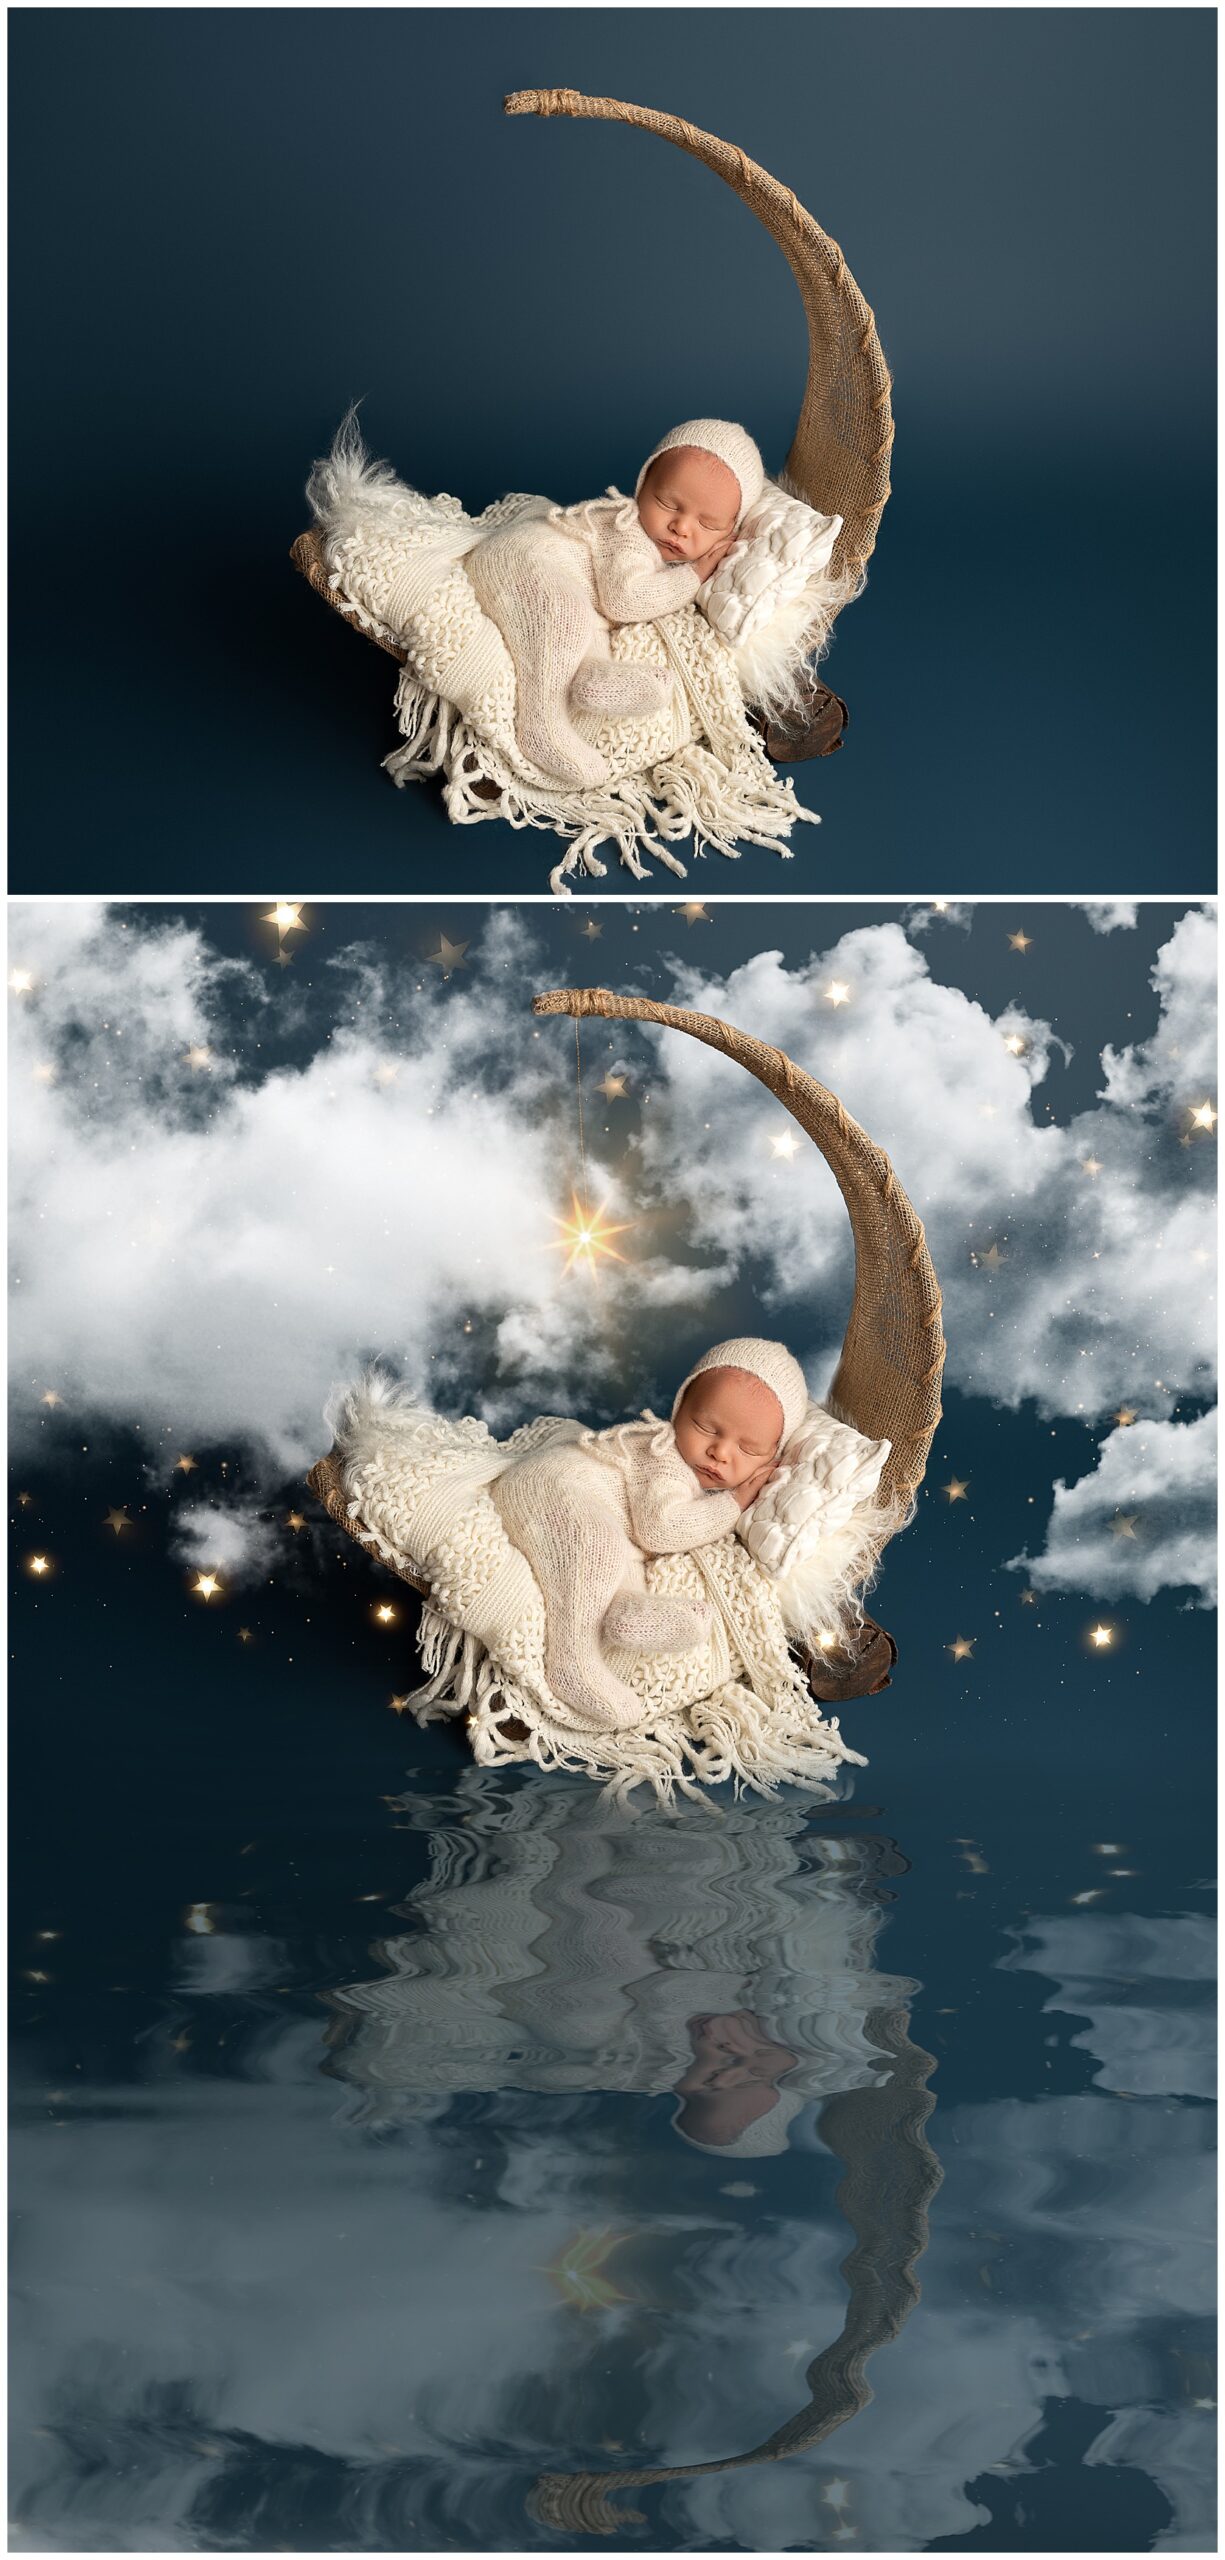 Two newborns photos. Top photo has a newborn on a jute moon prop on a plain blue background, and bottom contains the same photo with photoshopped stars, clouds, and water reflection. 